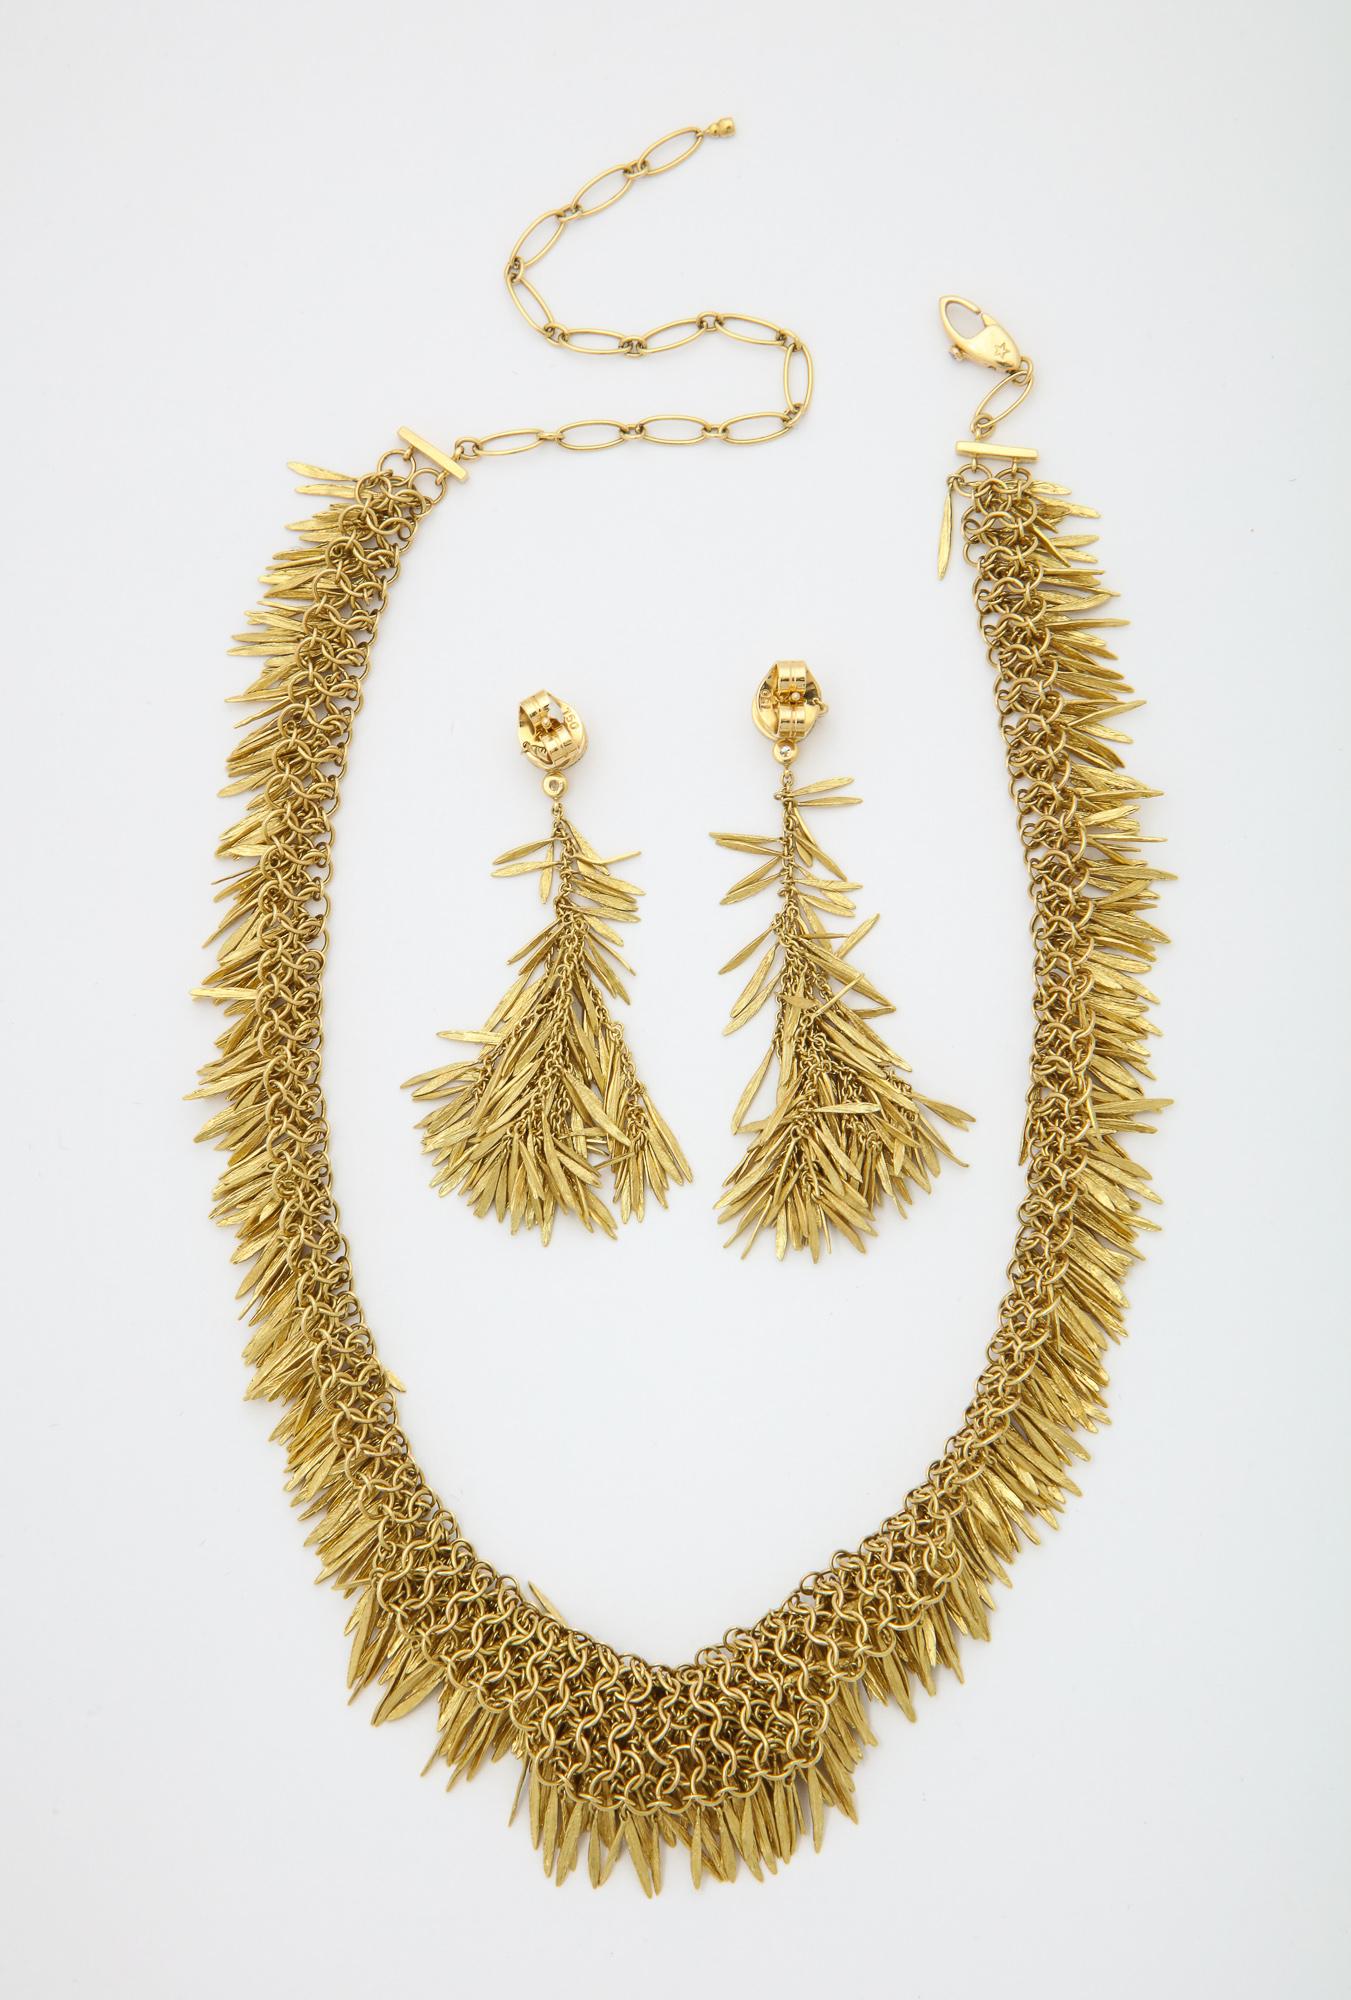 2000 H.Stern Feathers Collection Handcrafted Flexible Earring and Necklace Suite 1